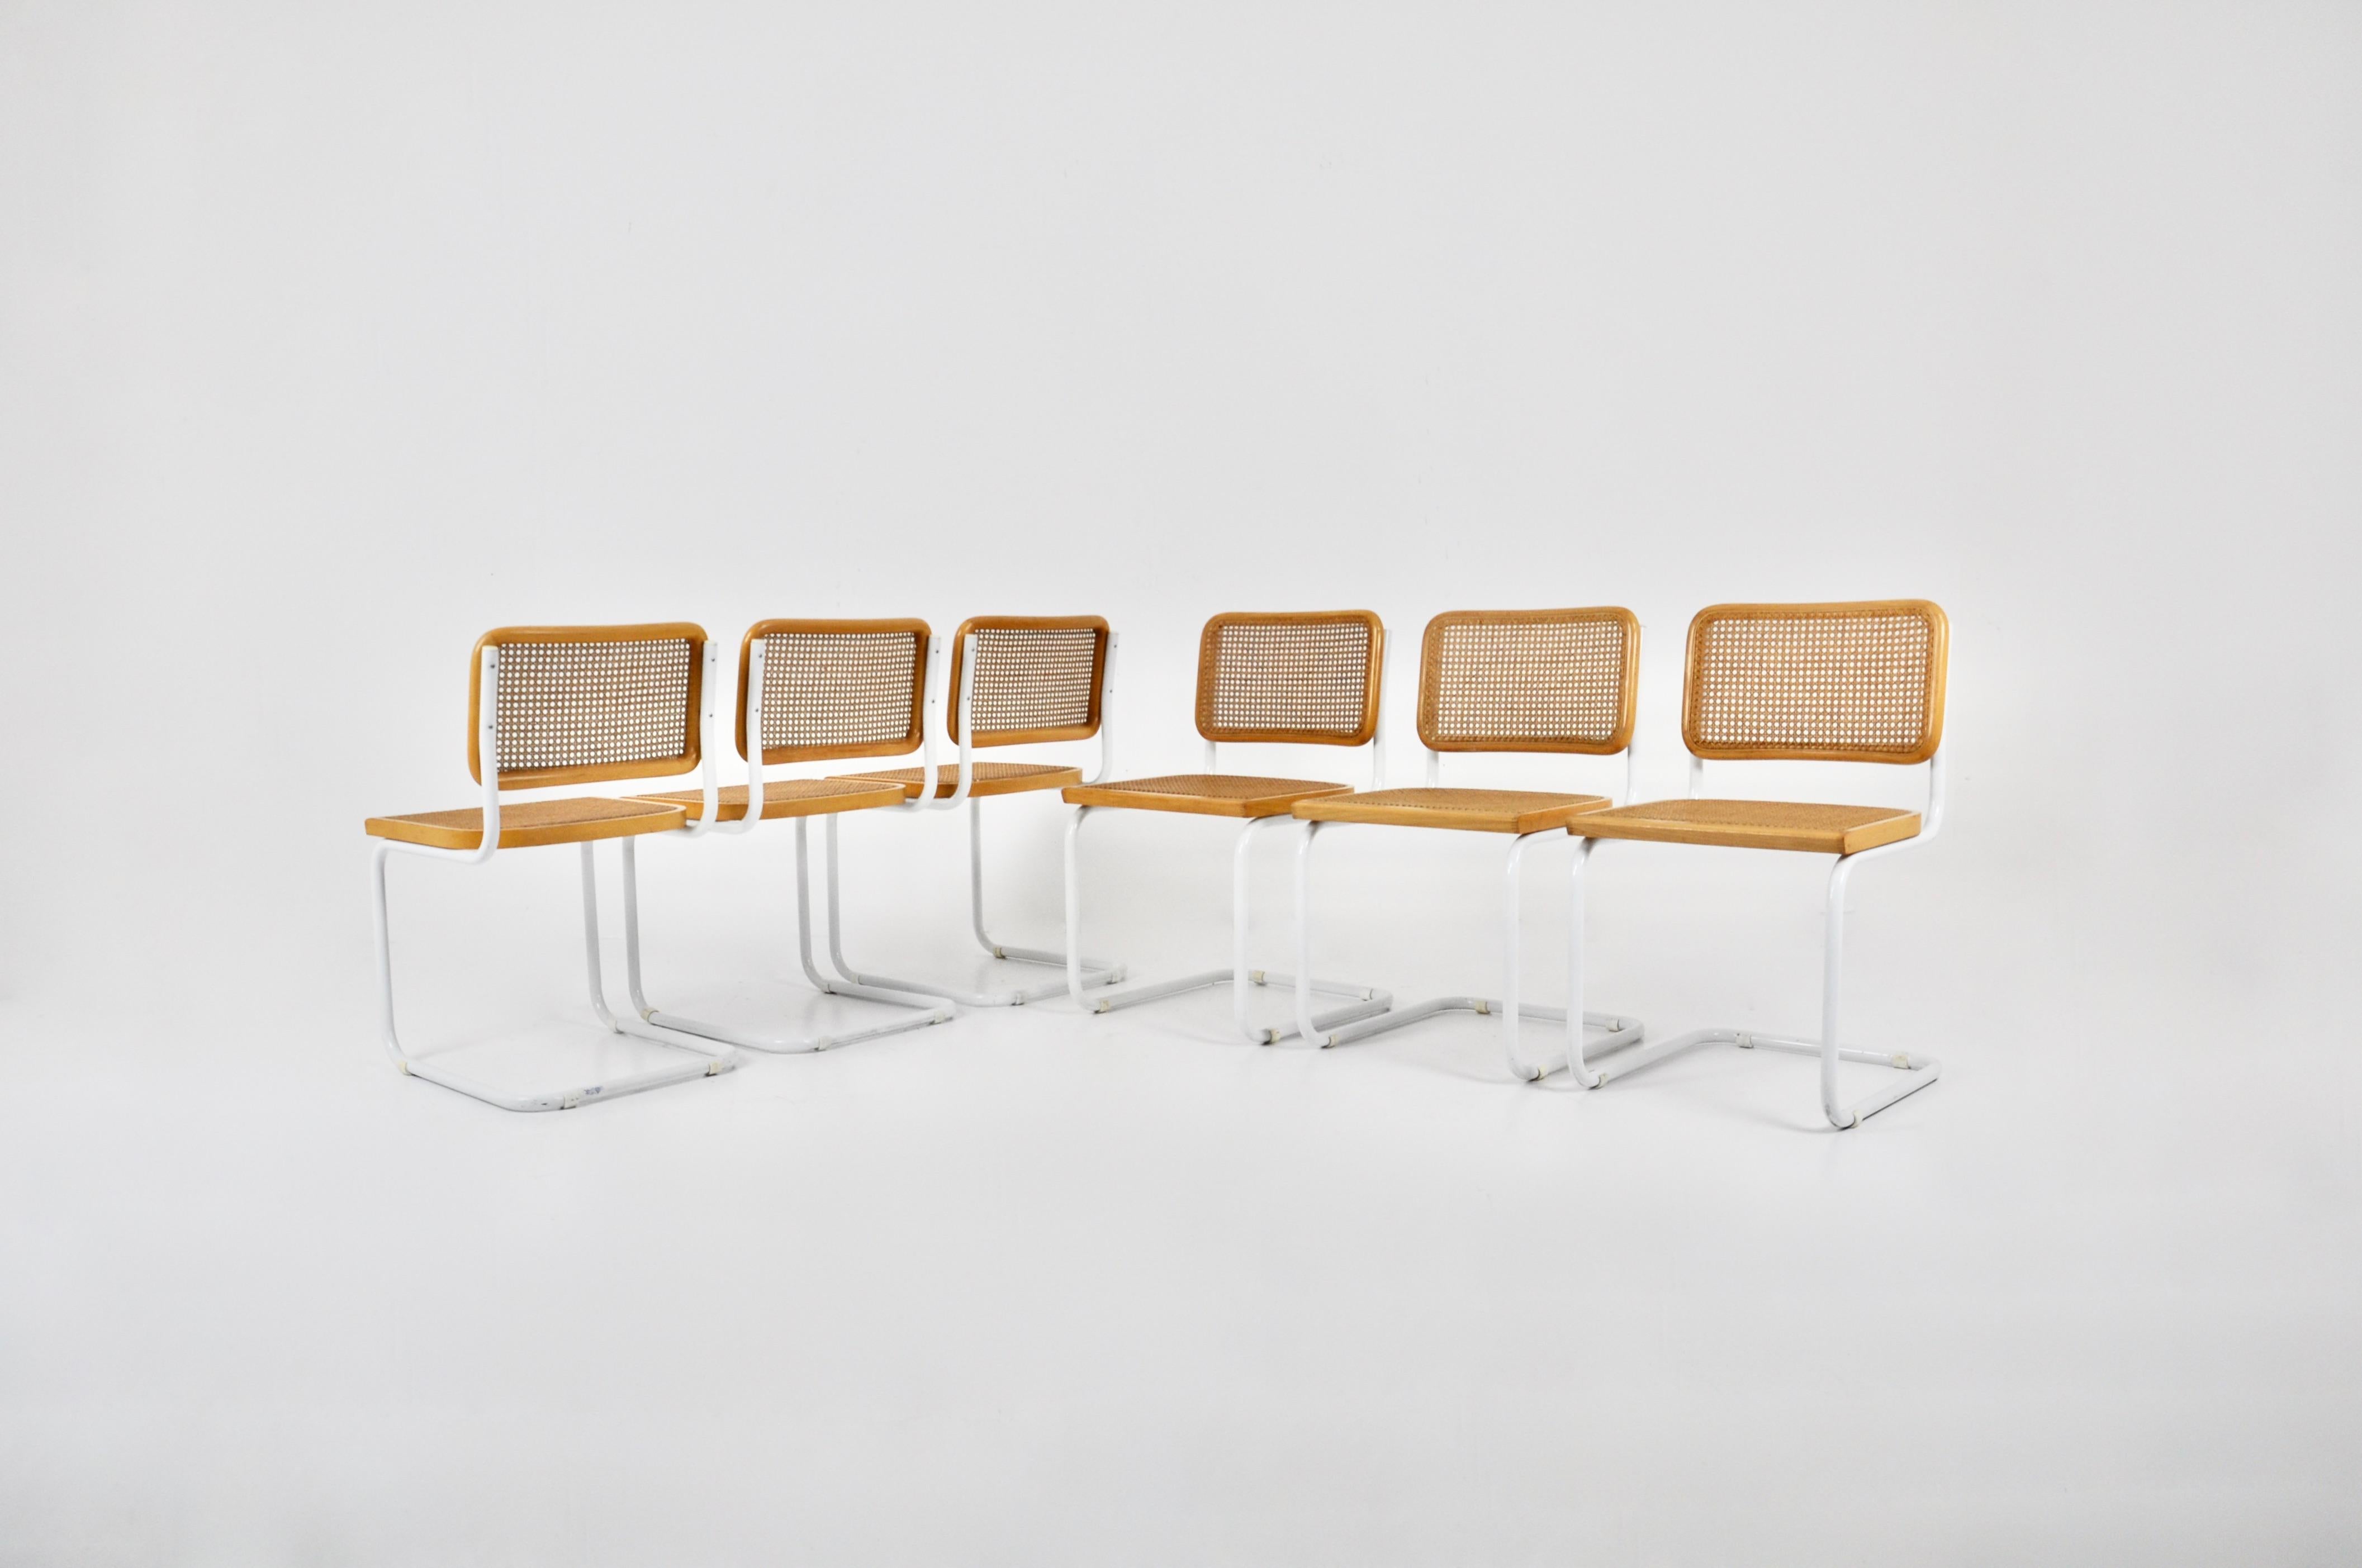 Set of 6 chairs in white metal, wood and cane. Wear due to time and age of the chairs. 
Measure: seat height: 45 cm.